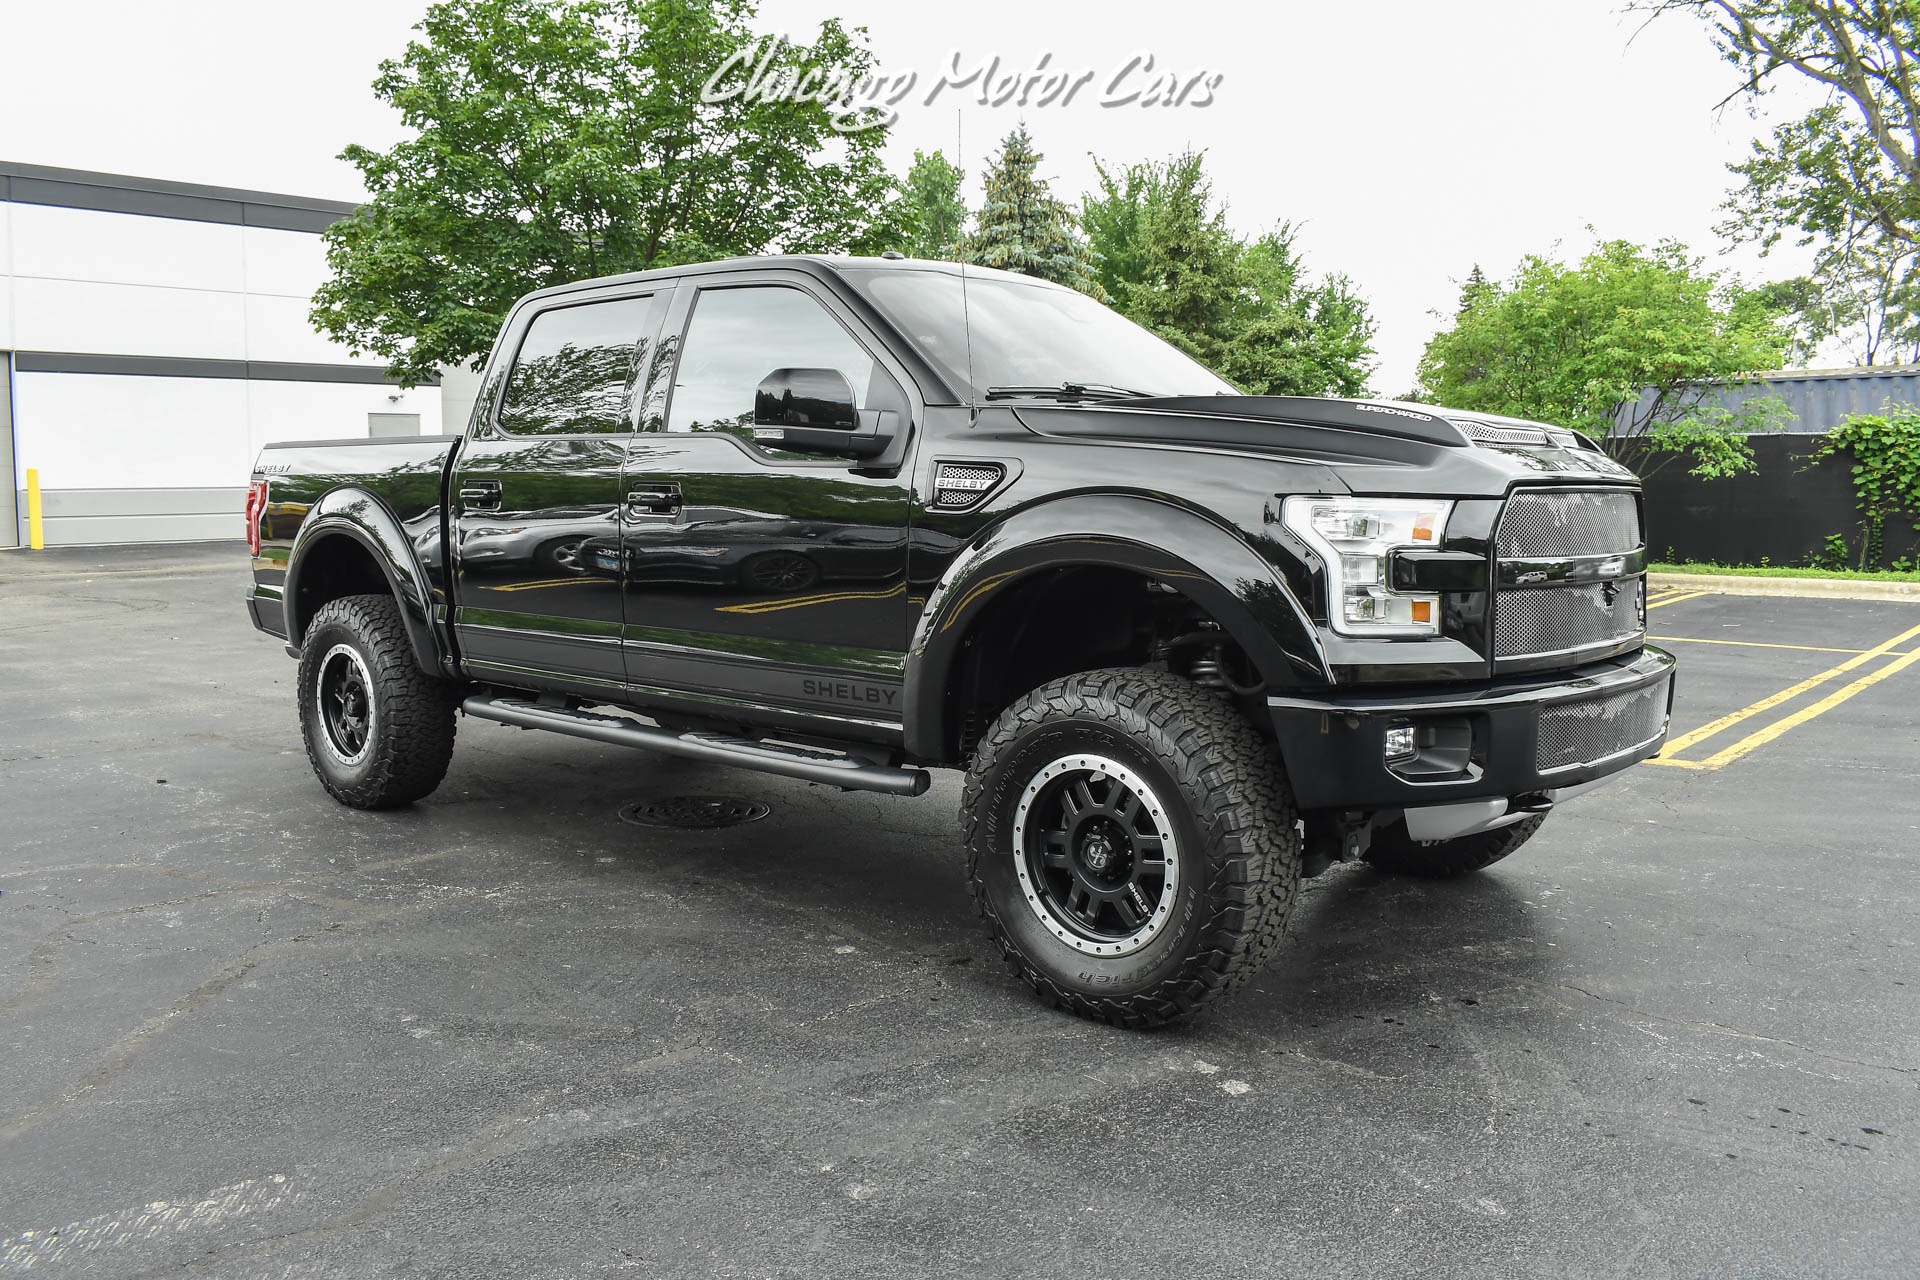 Used-2016-Ford-F150-SHELBY-4x4-Super-Crew-Pick-Up-Truck-700HP-50L-SUPERCHARGED-V8-RARE